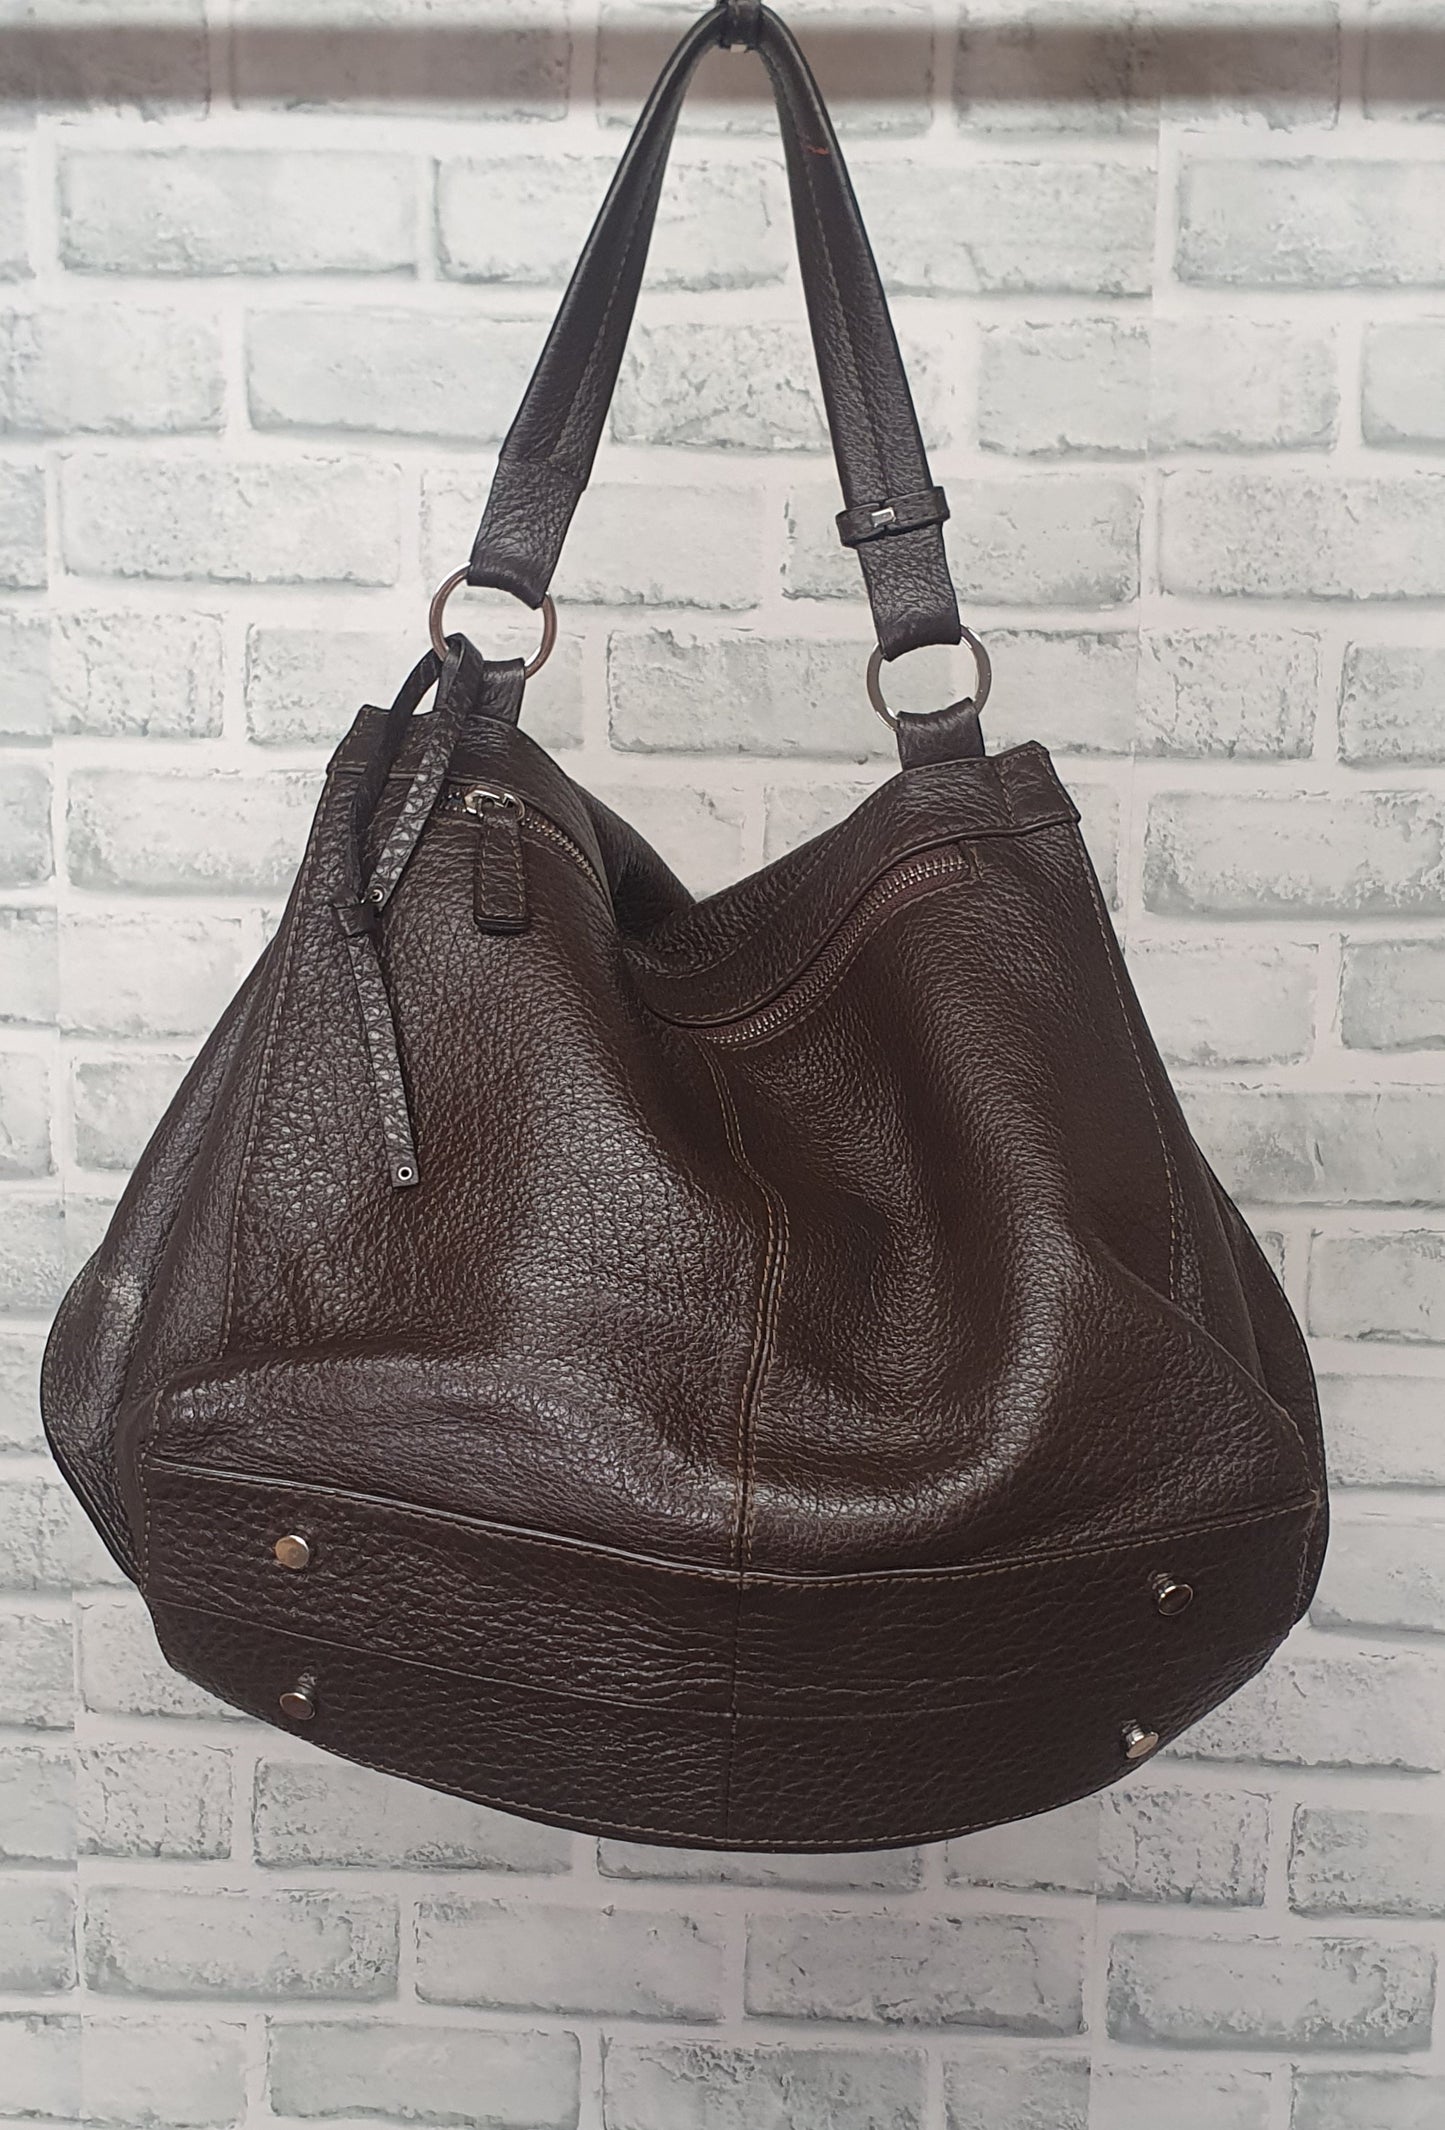 Gianni Conti Brown Leather Slouchy Bag